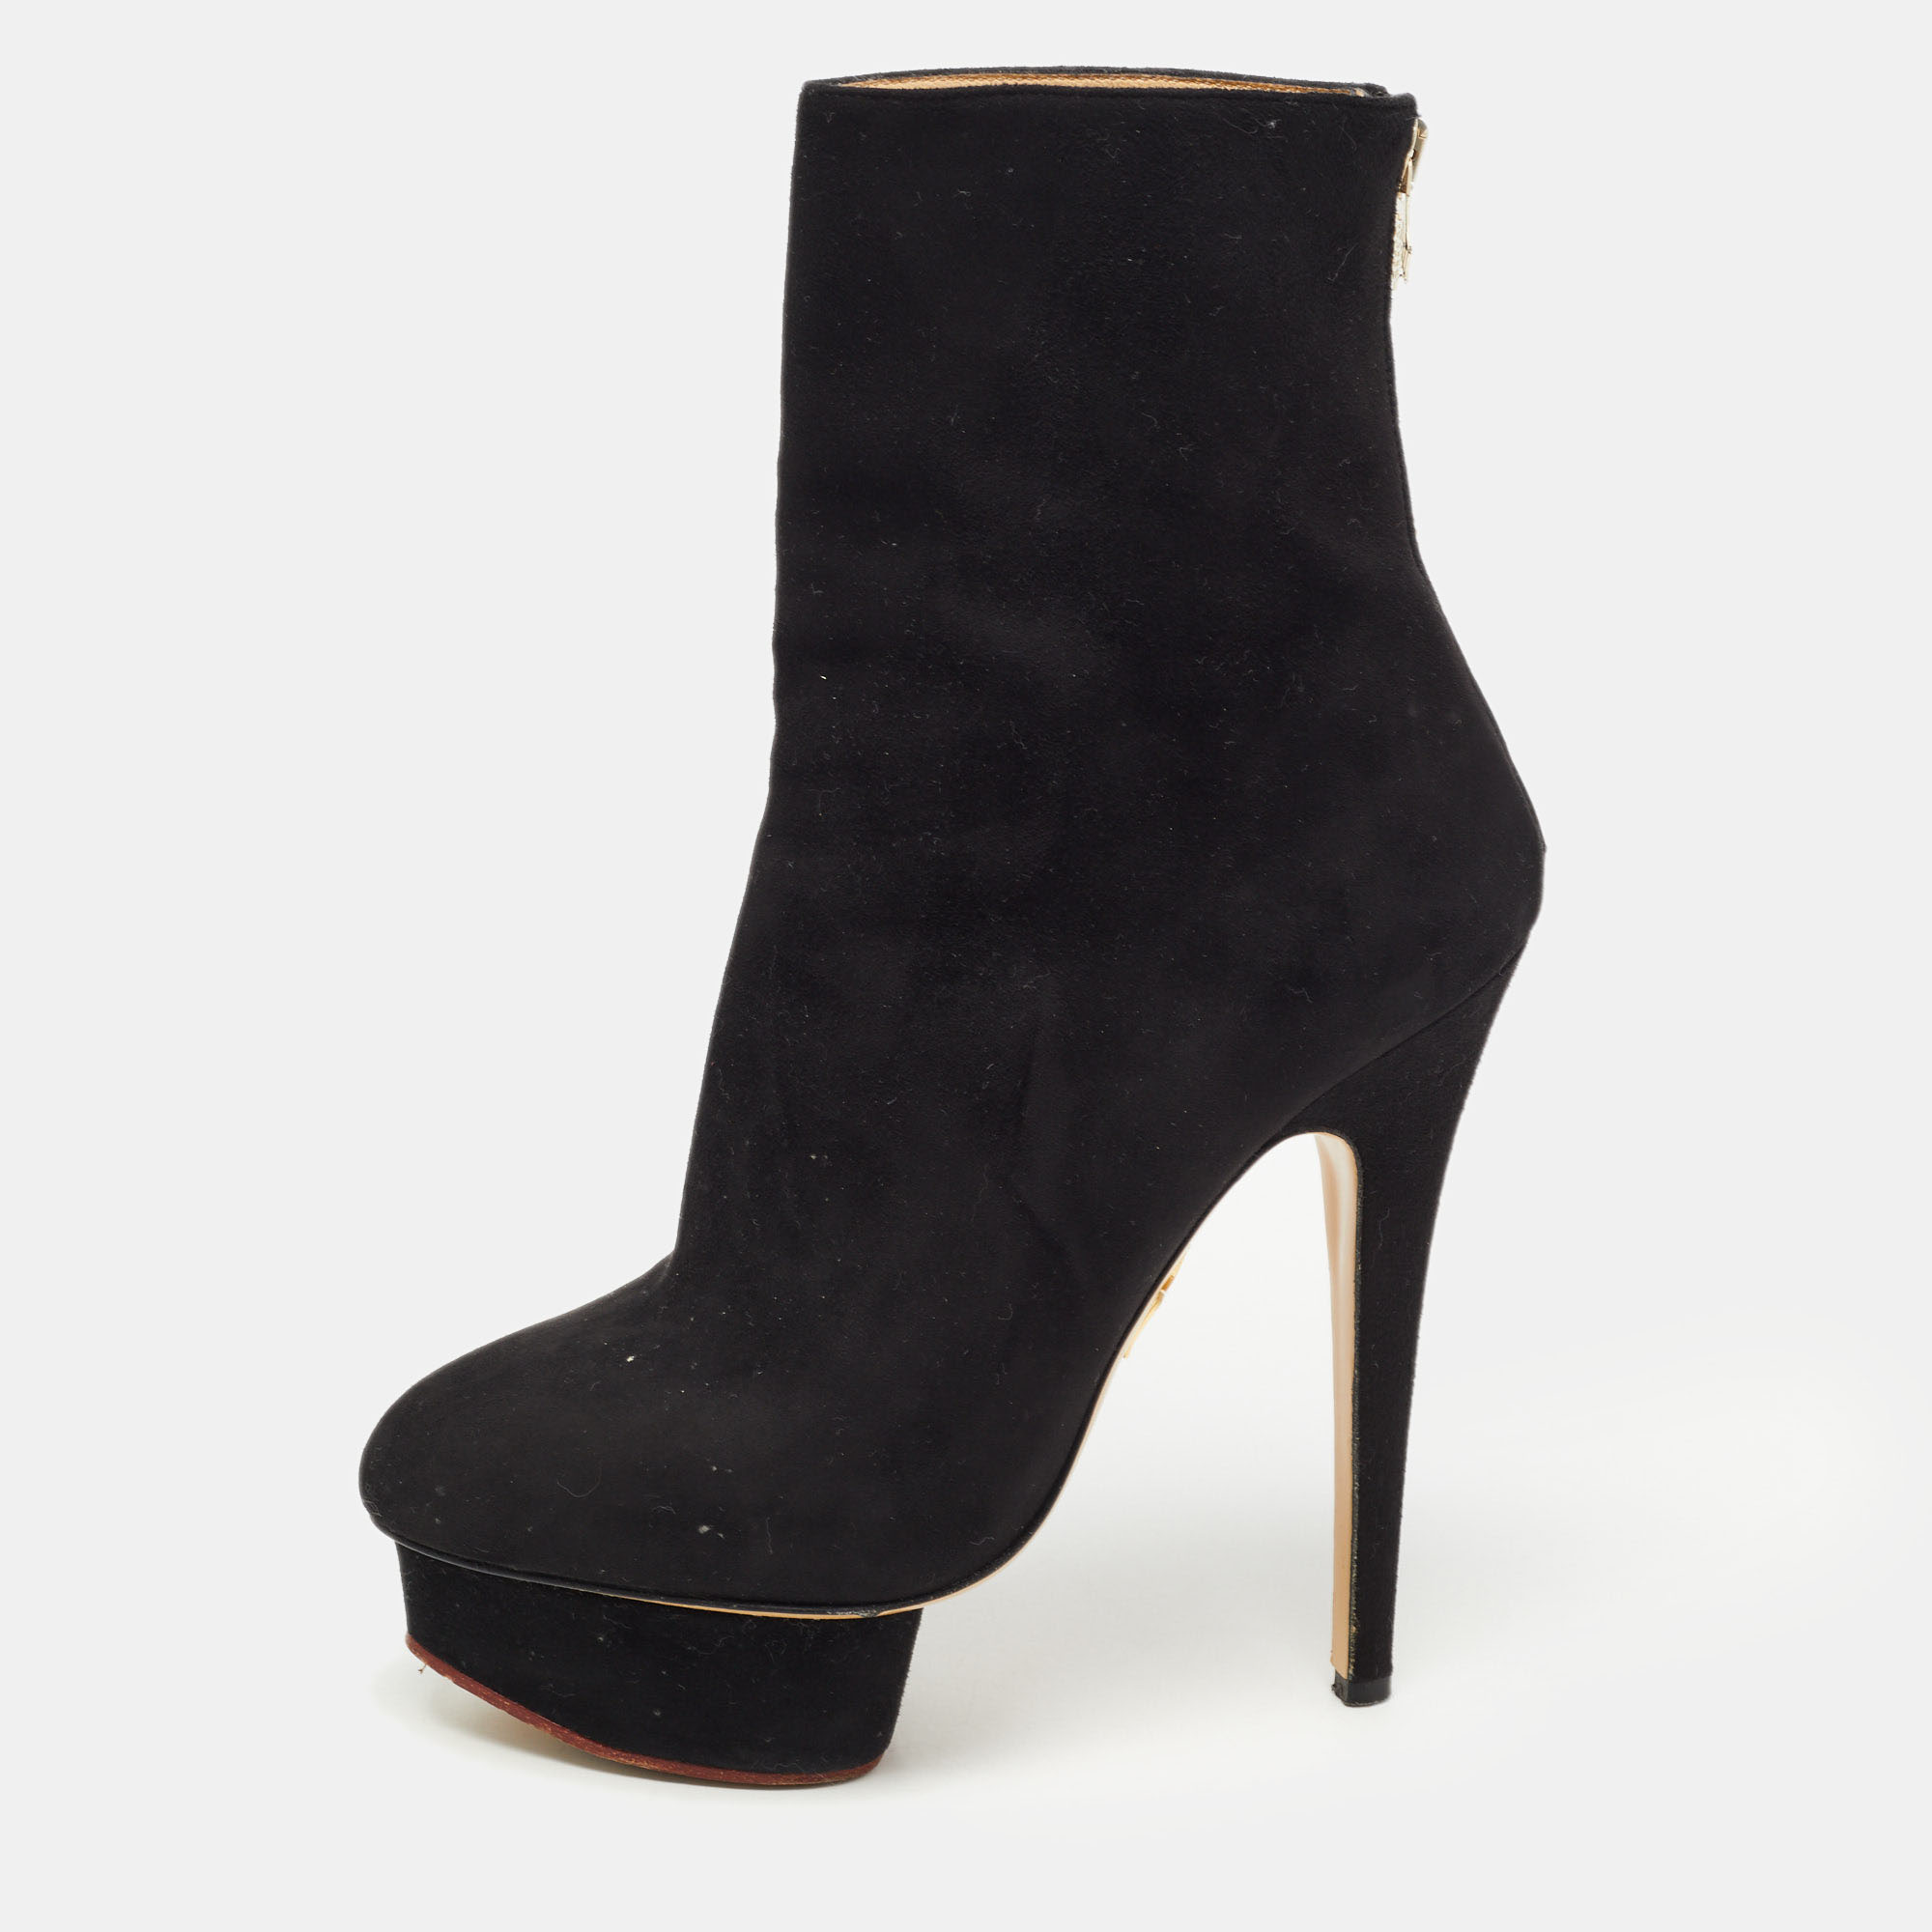 Charlotte Olympia Black Suede Platform Ankle Booties Size 38